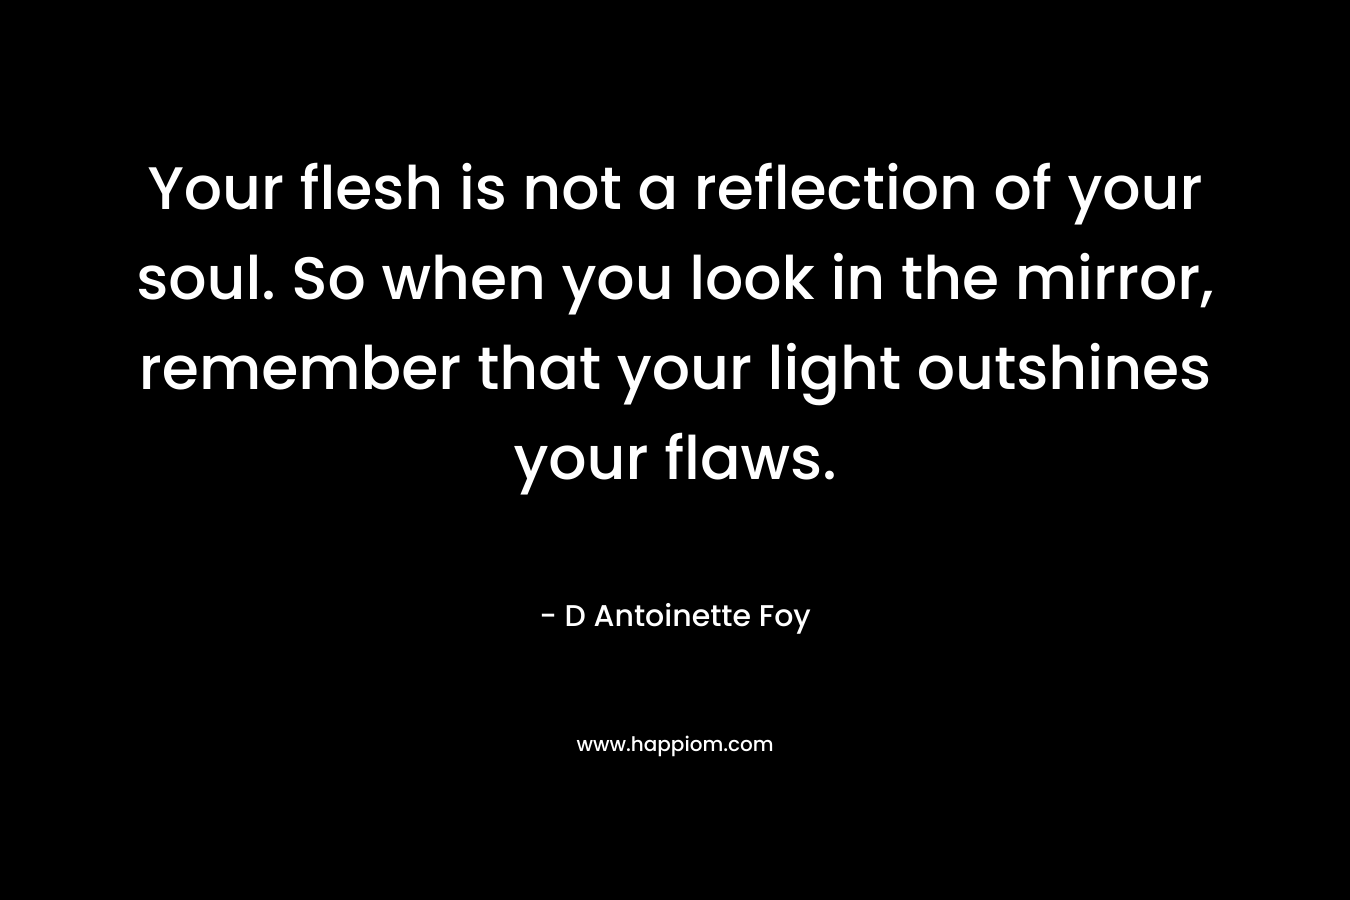 Your flesh is not a reflection of your soul. So when you look in the mirror, remember that your light outshines your flaws. – D Antoinette Foy